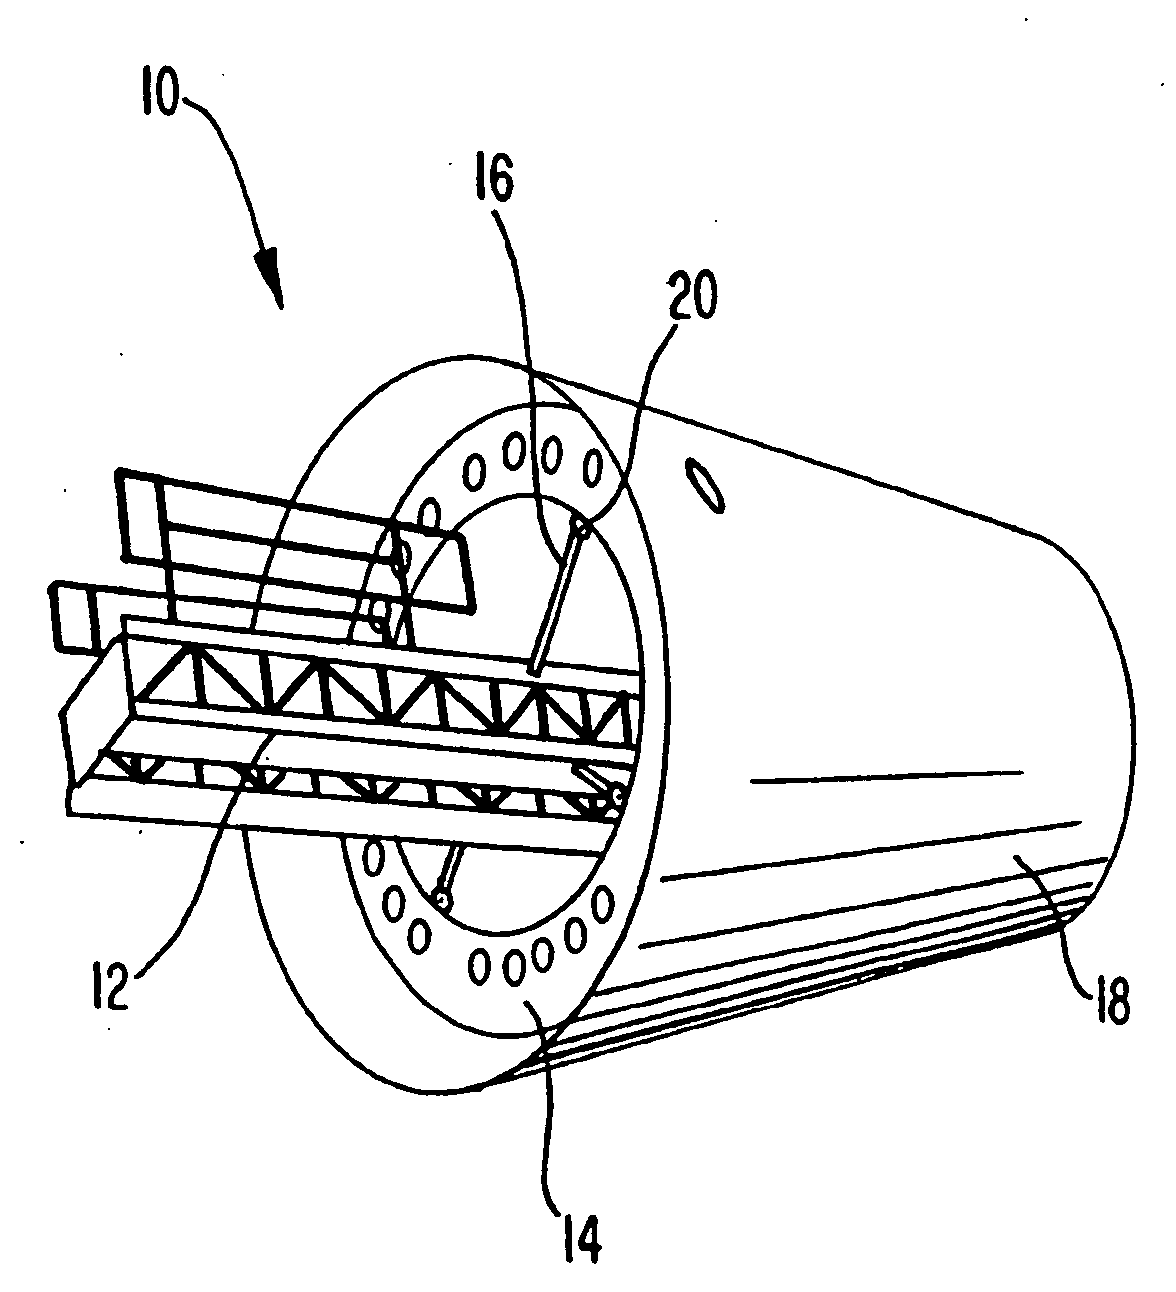 Rotating internal support apparatus and method for large hollow structures